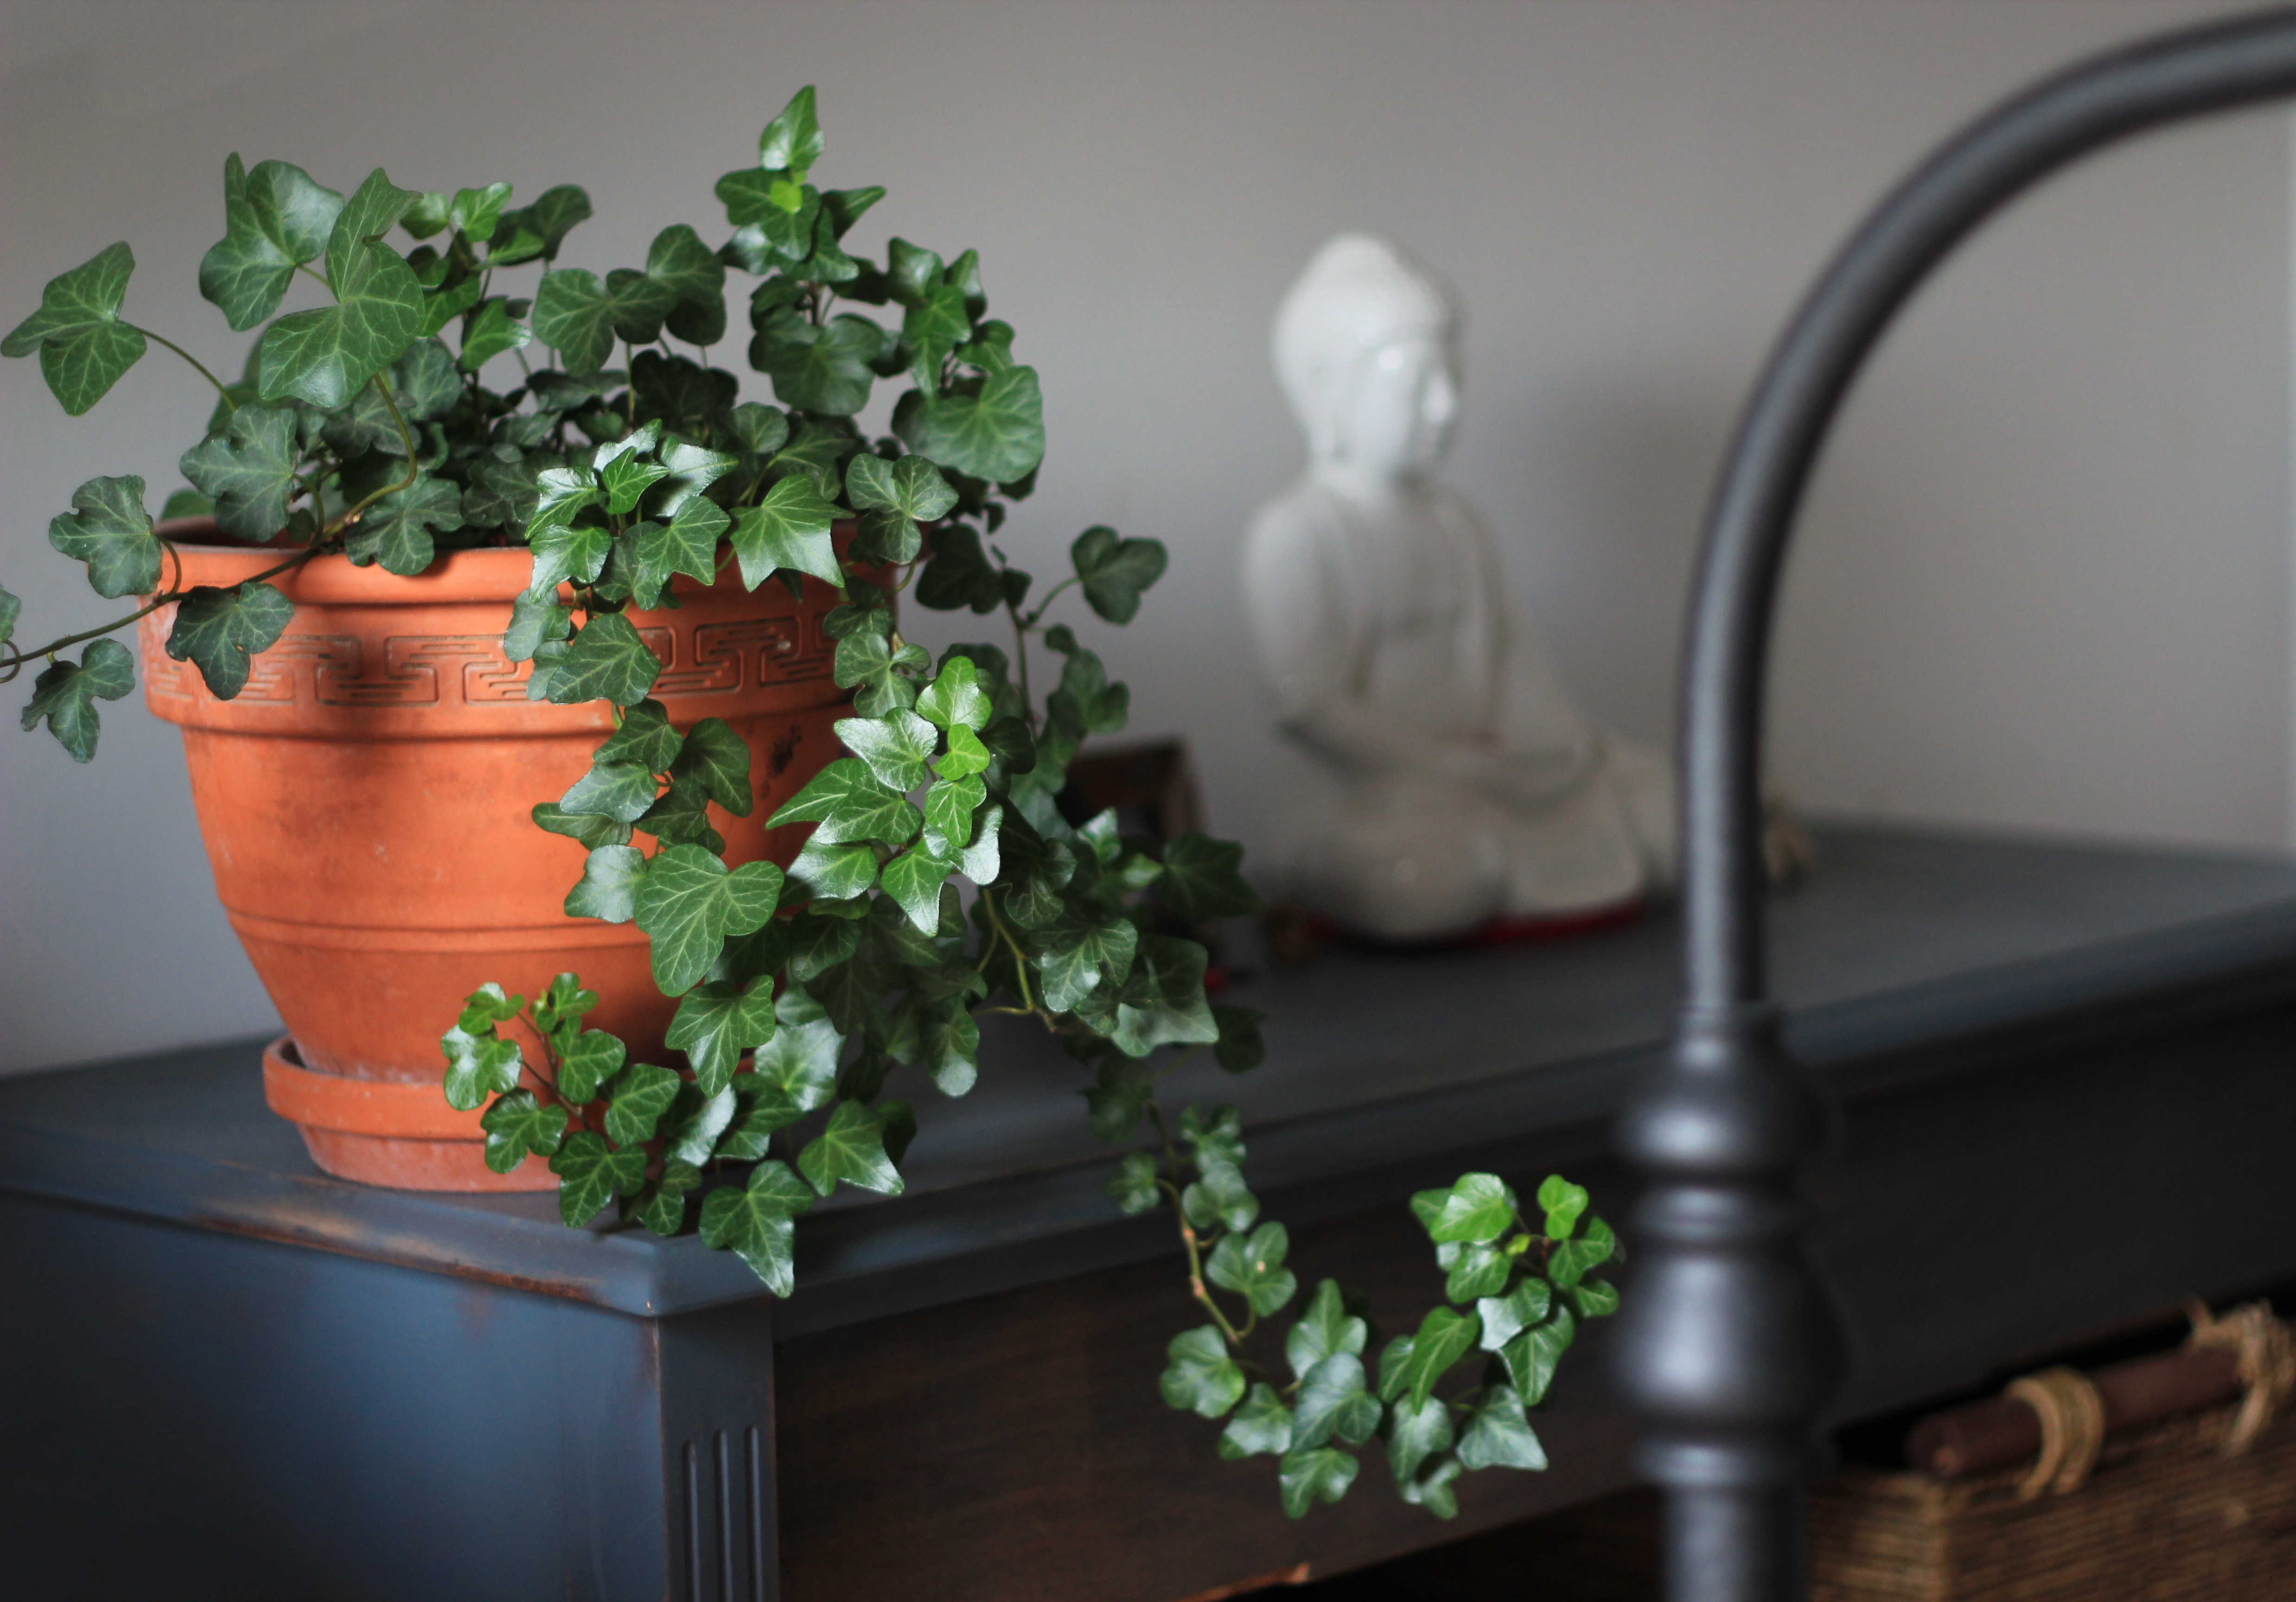 Breathe Easy: Improving Indoor Air Quality With Decor And Plants